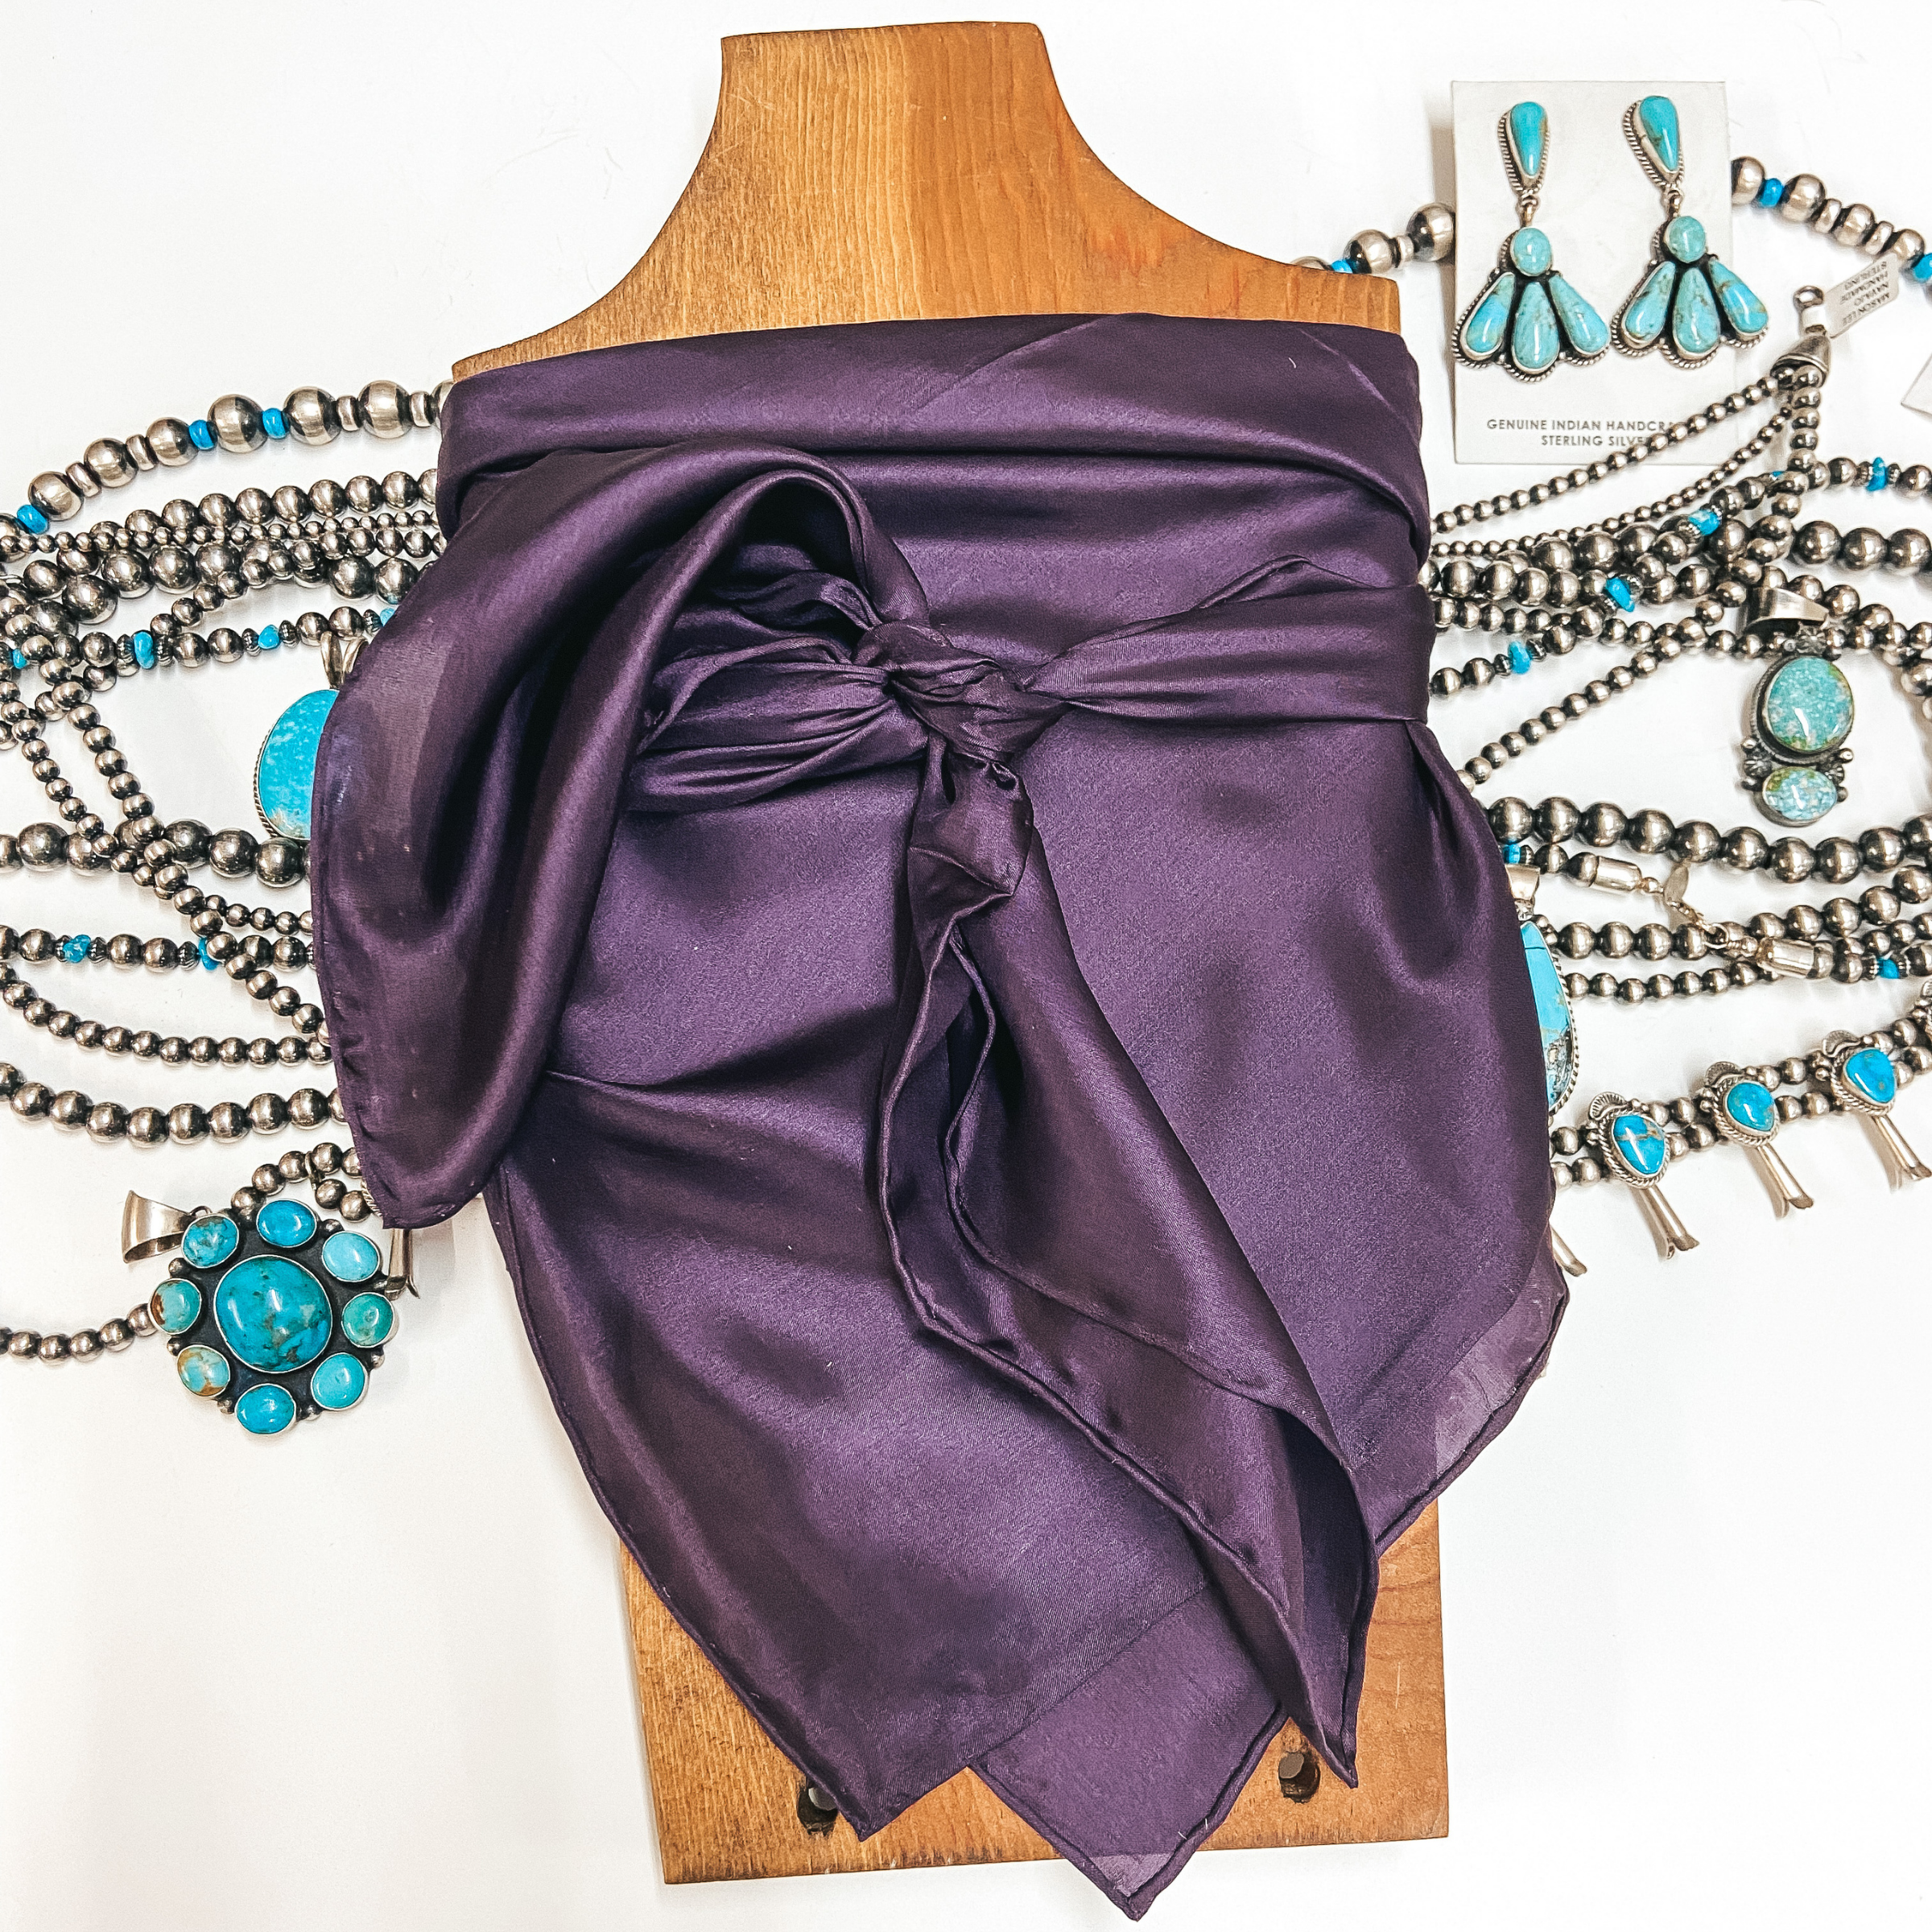 A solid color wild rag tied around a wooden display. Pictured on white background with turquoise jewelry.